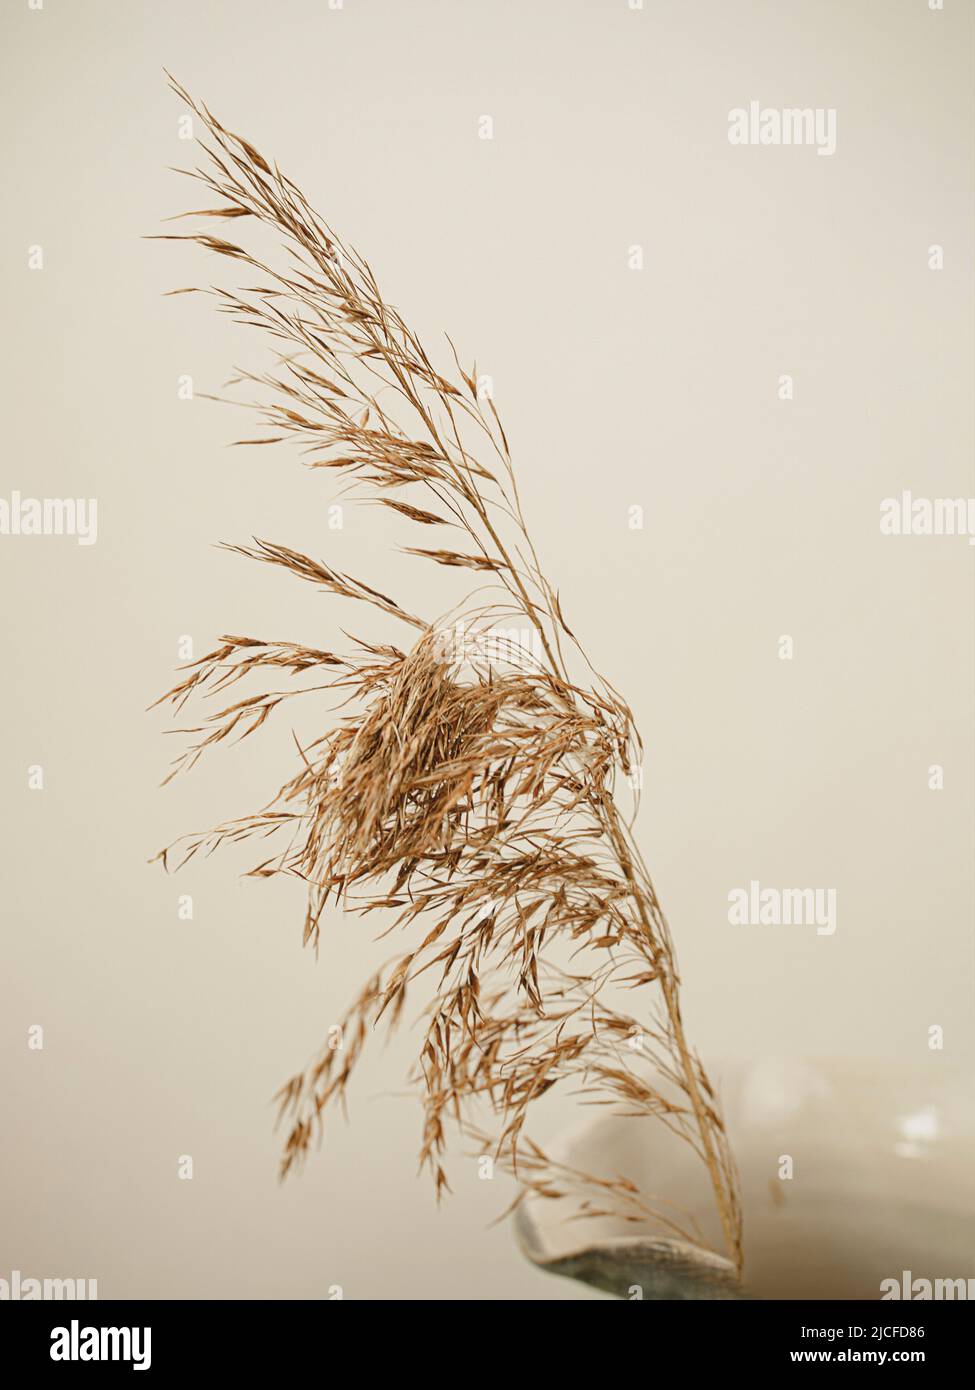 Pampas grass in a vase Stock Photo